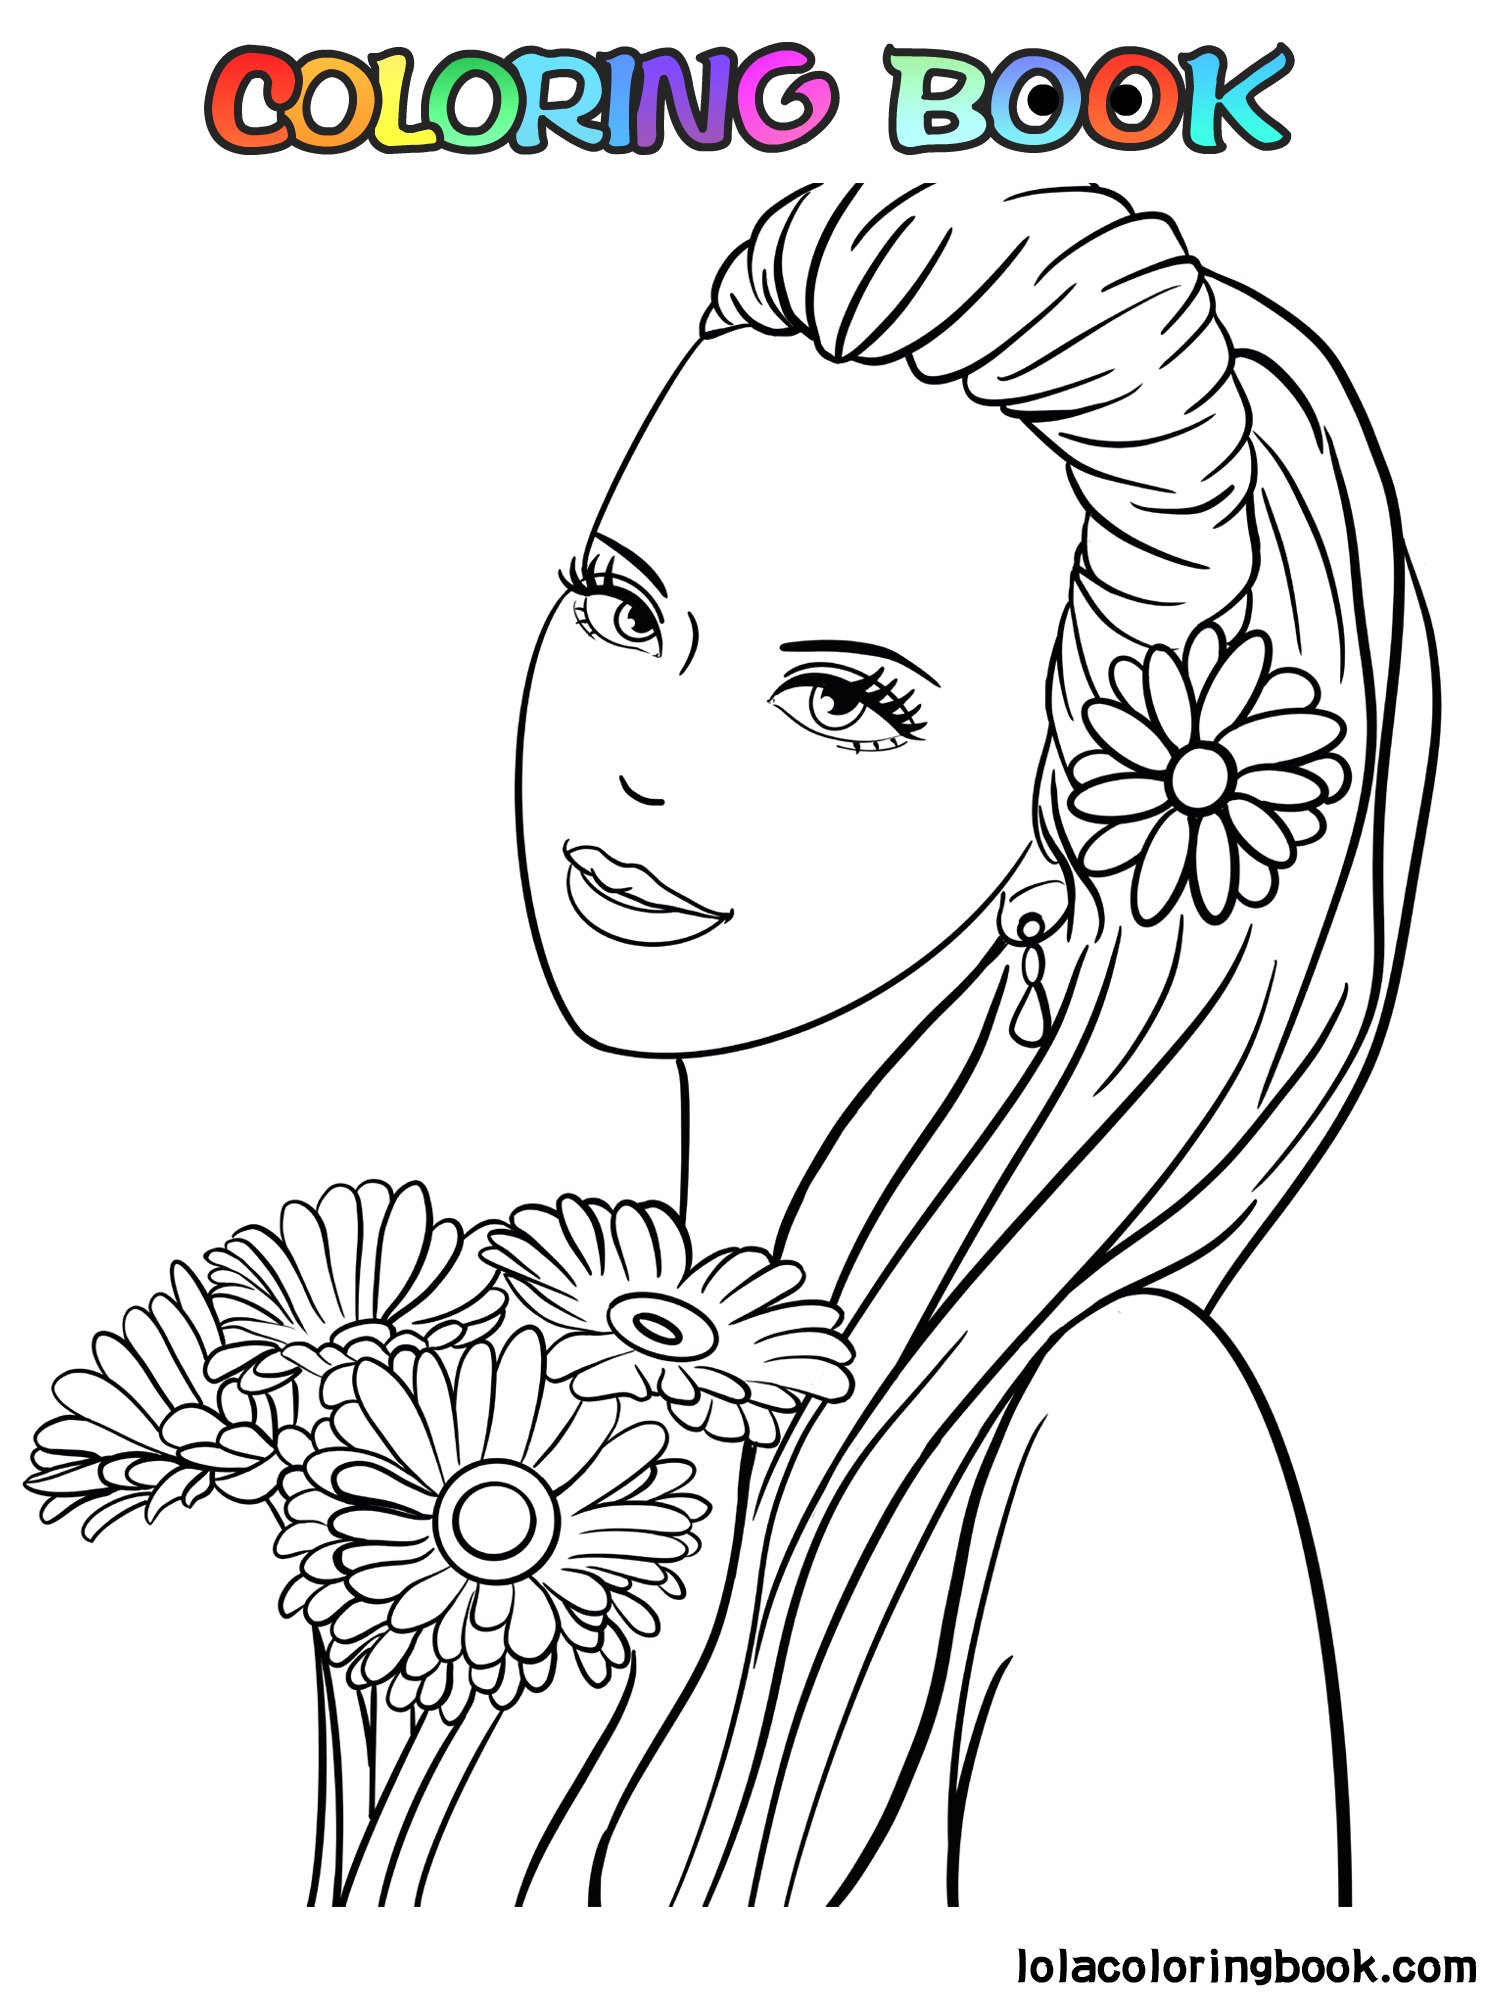 lola-with-flowers2-lola-printable-coloring-books